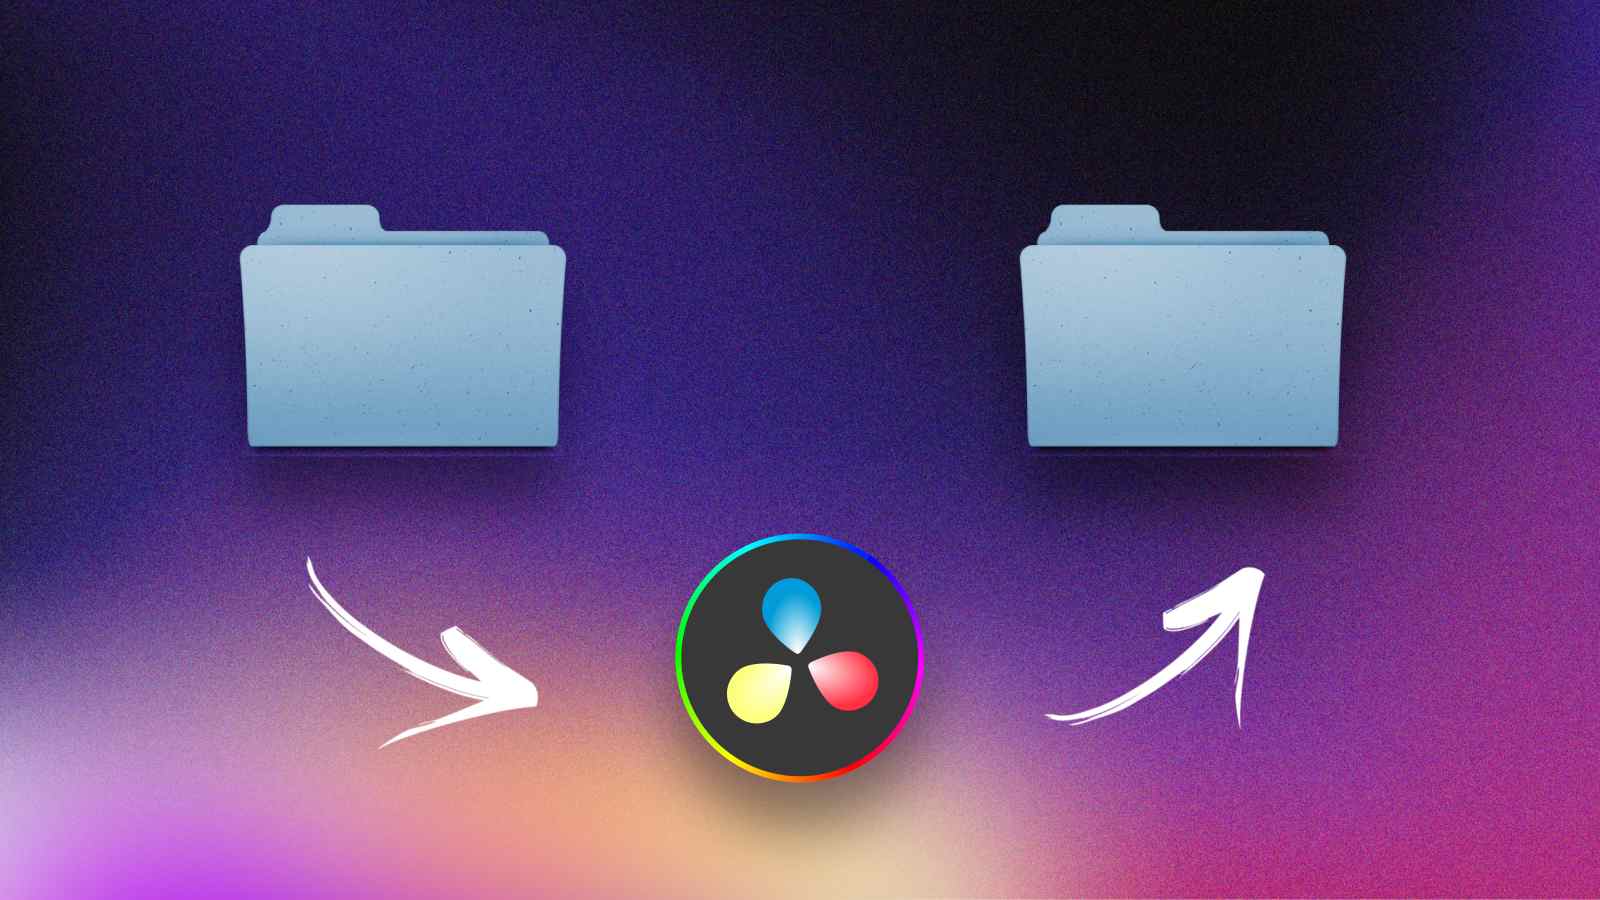 How to Transfer DaVinci Resolve Project to Another Computer